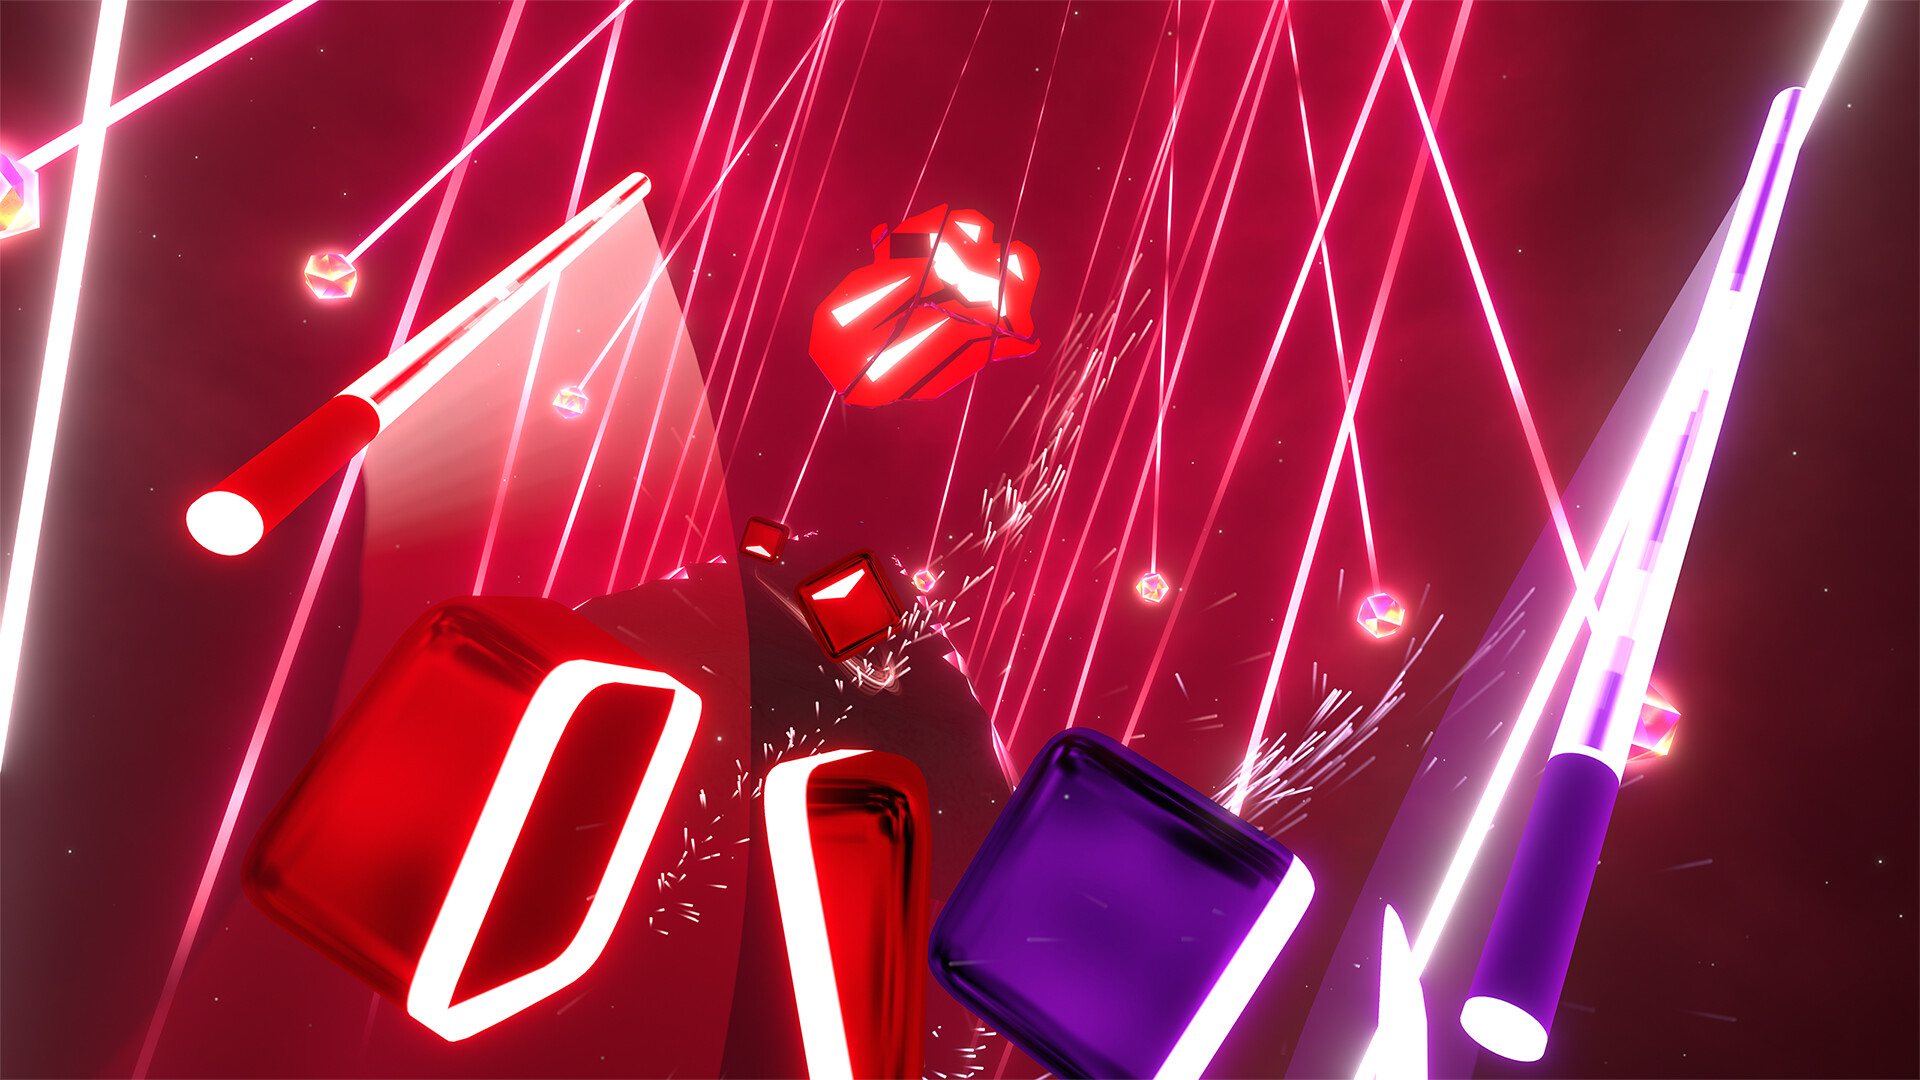 Beat Saber - The Rolling Stones - "Bite My Head Off" Featured Screenshot #1